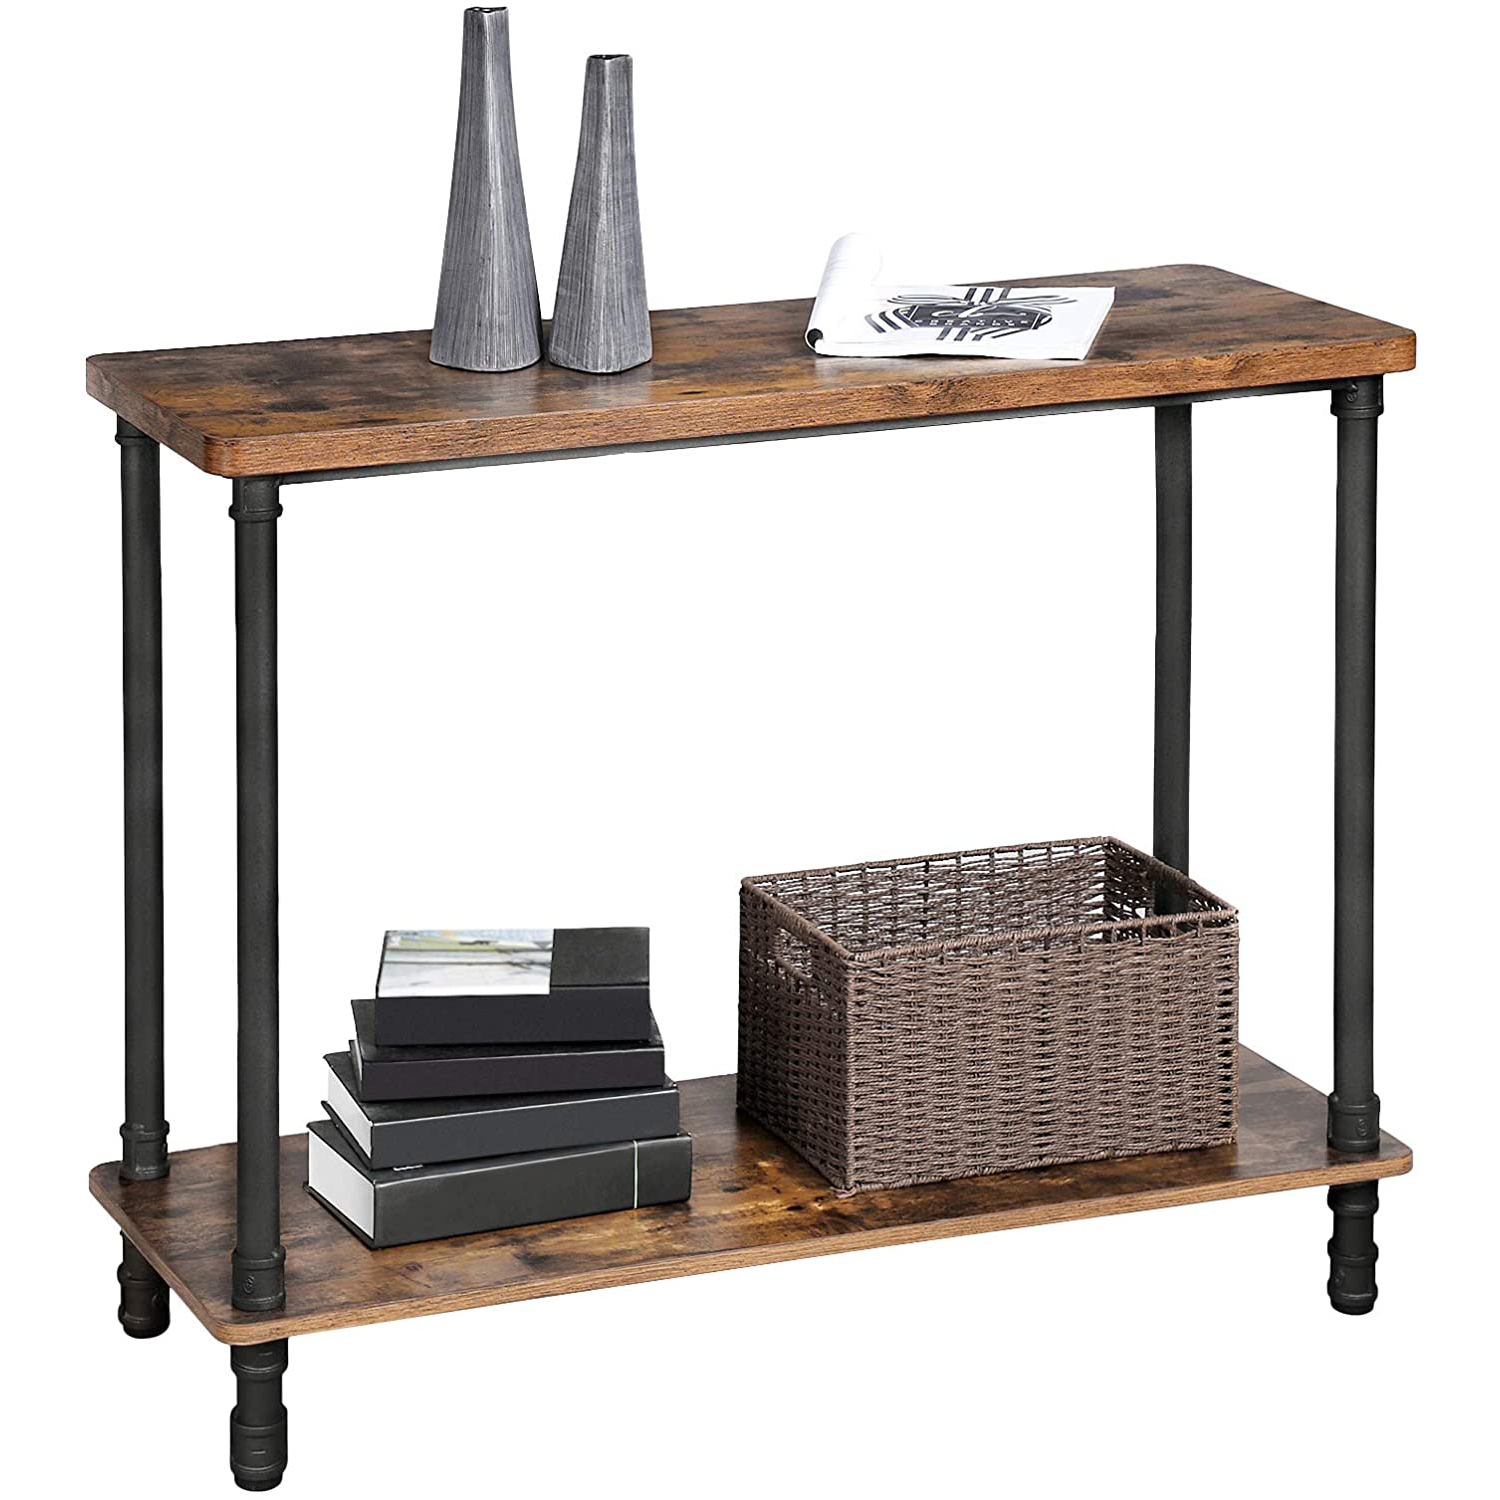 Rustic Brown Pipe Legs Console Table